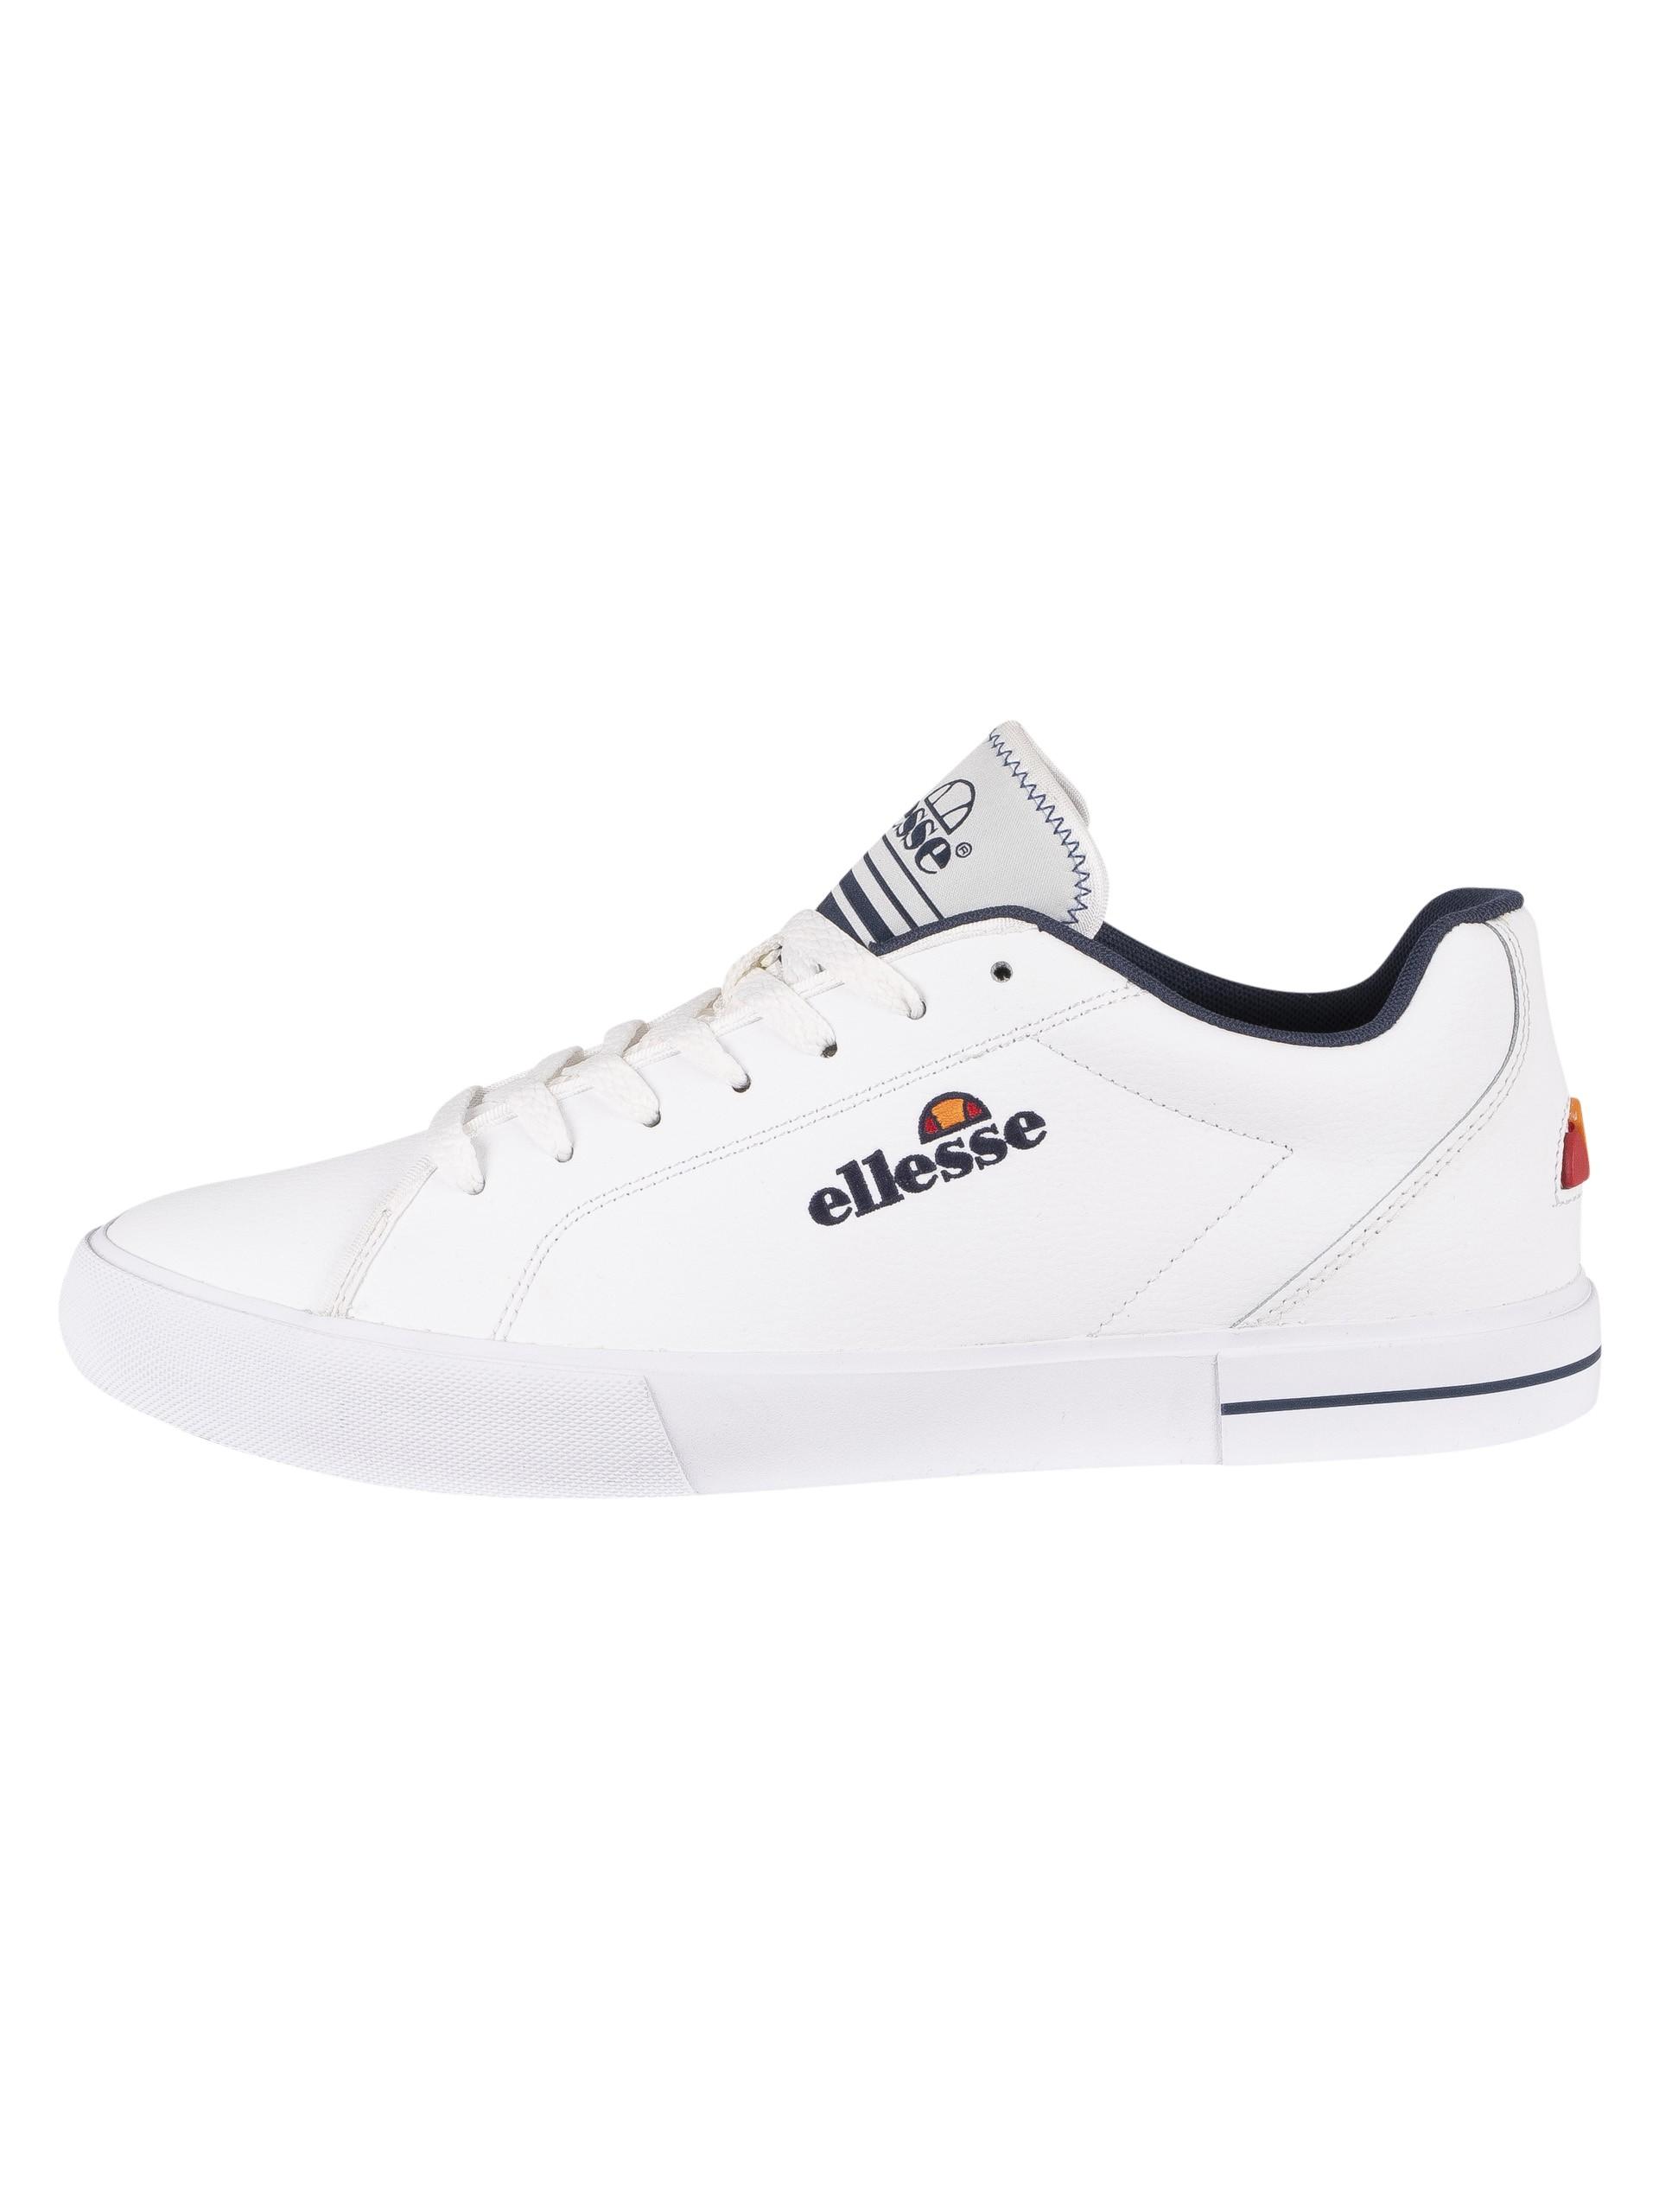 Ellesse Taggia Leather Trainers in White/White/Dark Blue (White) for Men |  Lyst